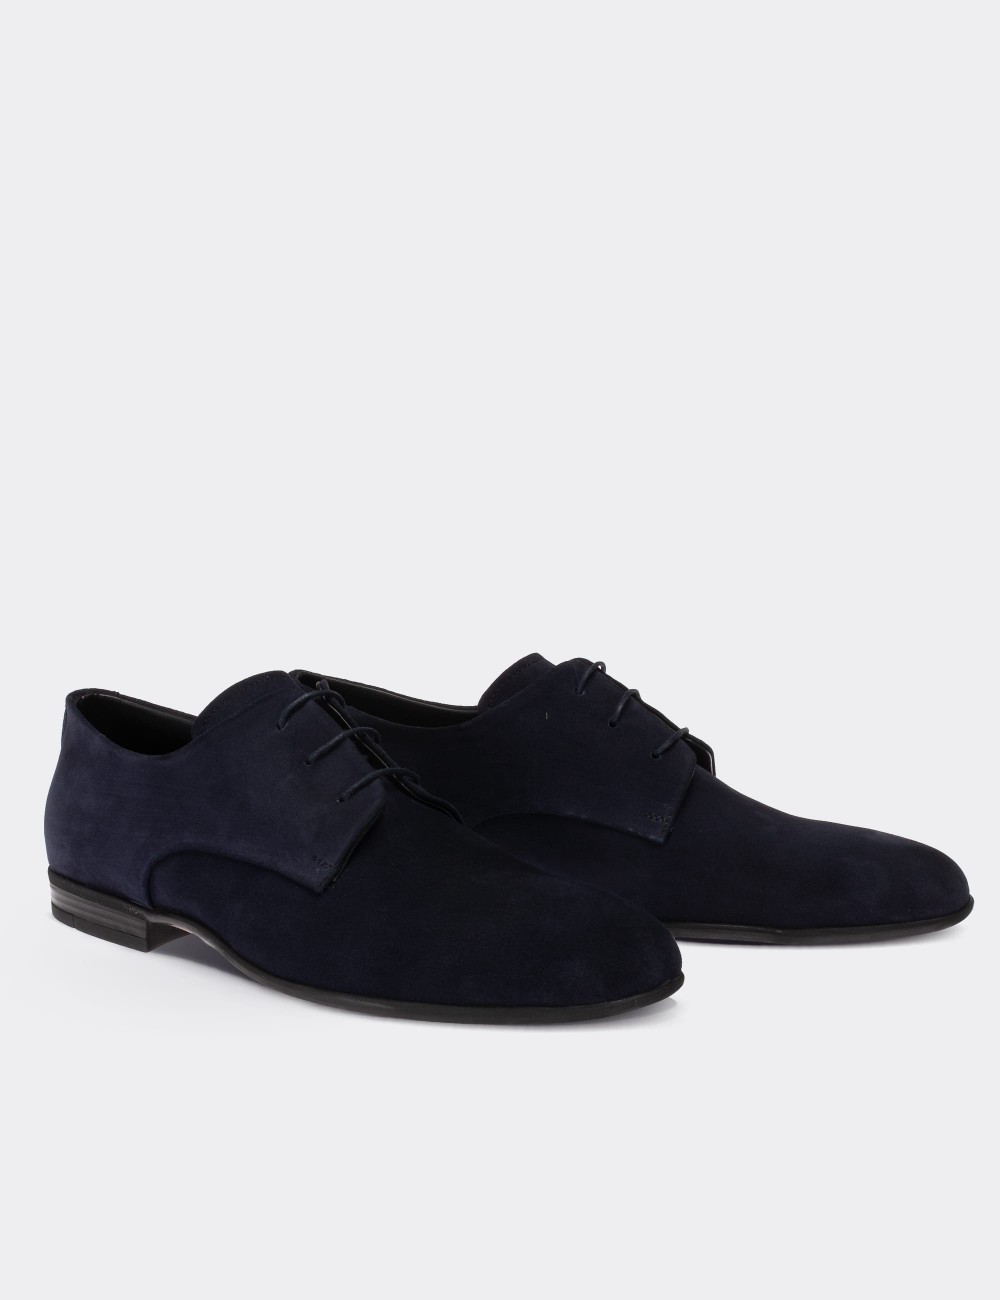 Navy Suede Leather Classic Shoes - 01709MLCVC03